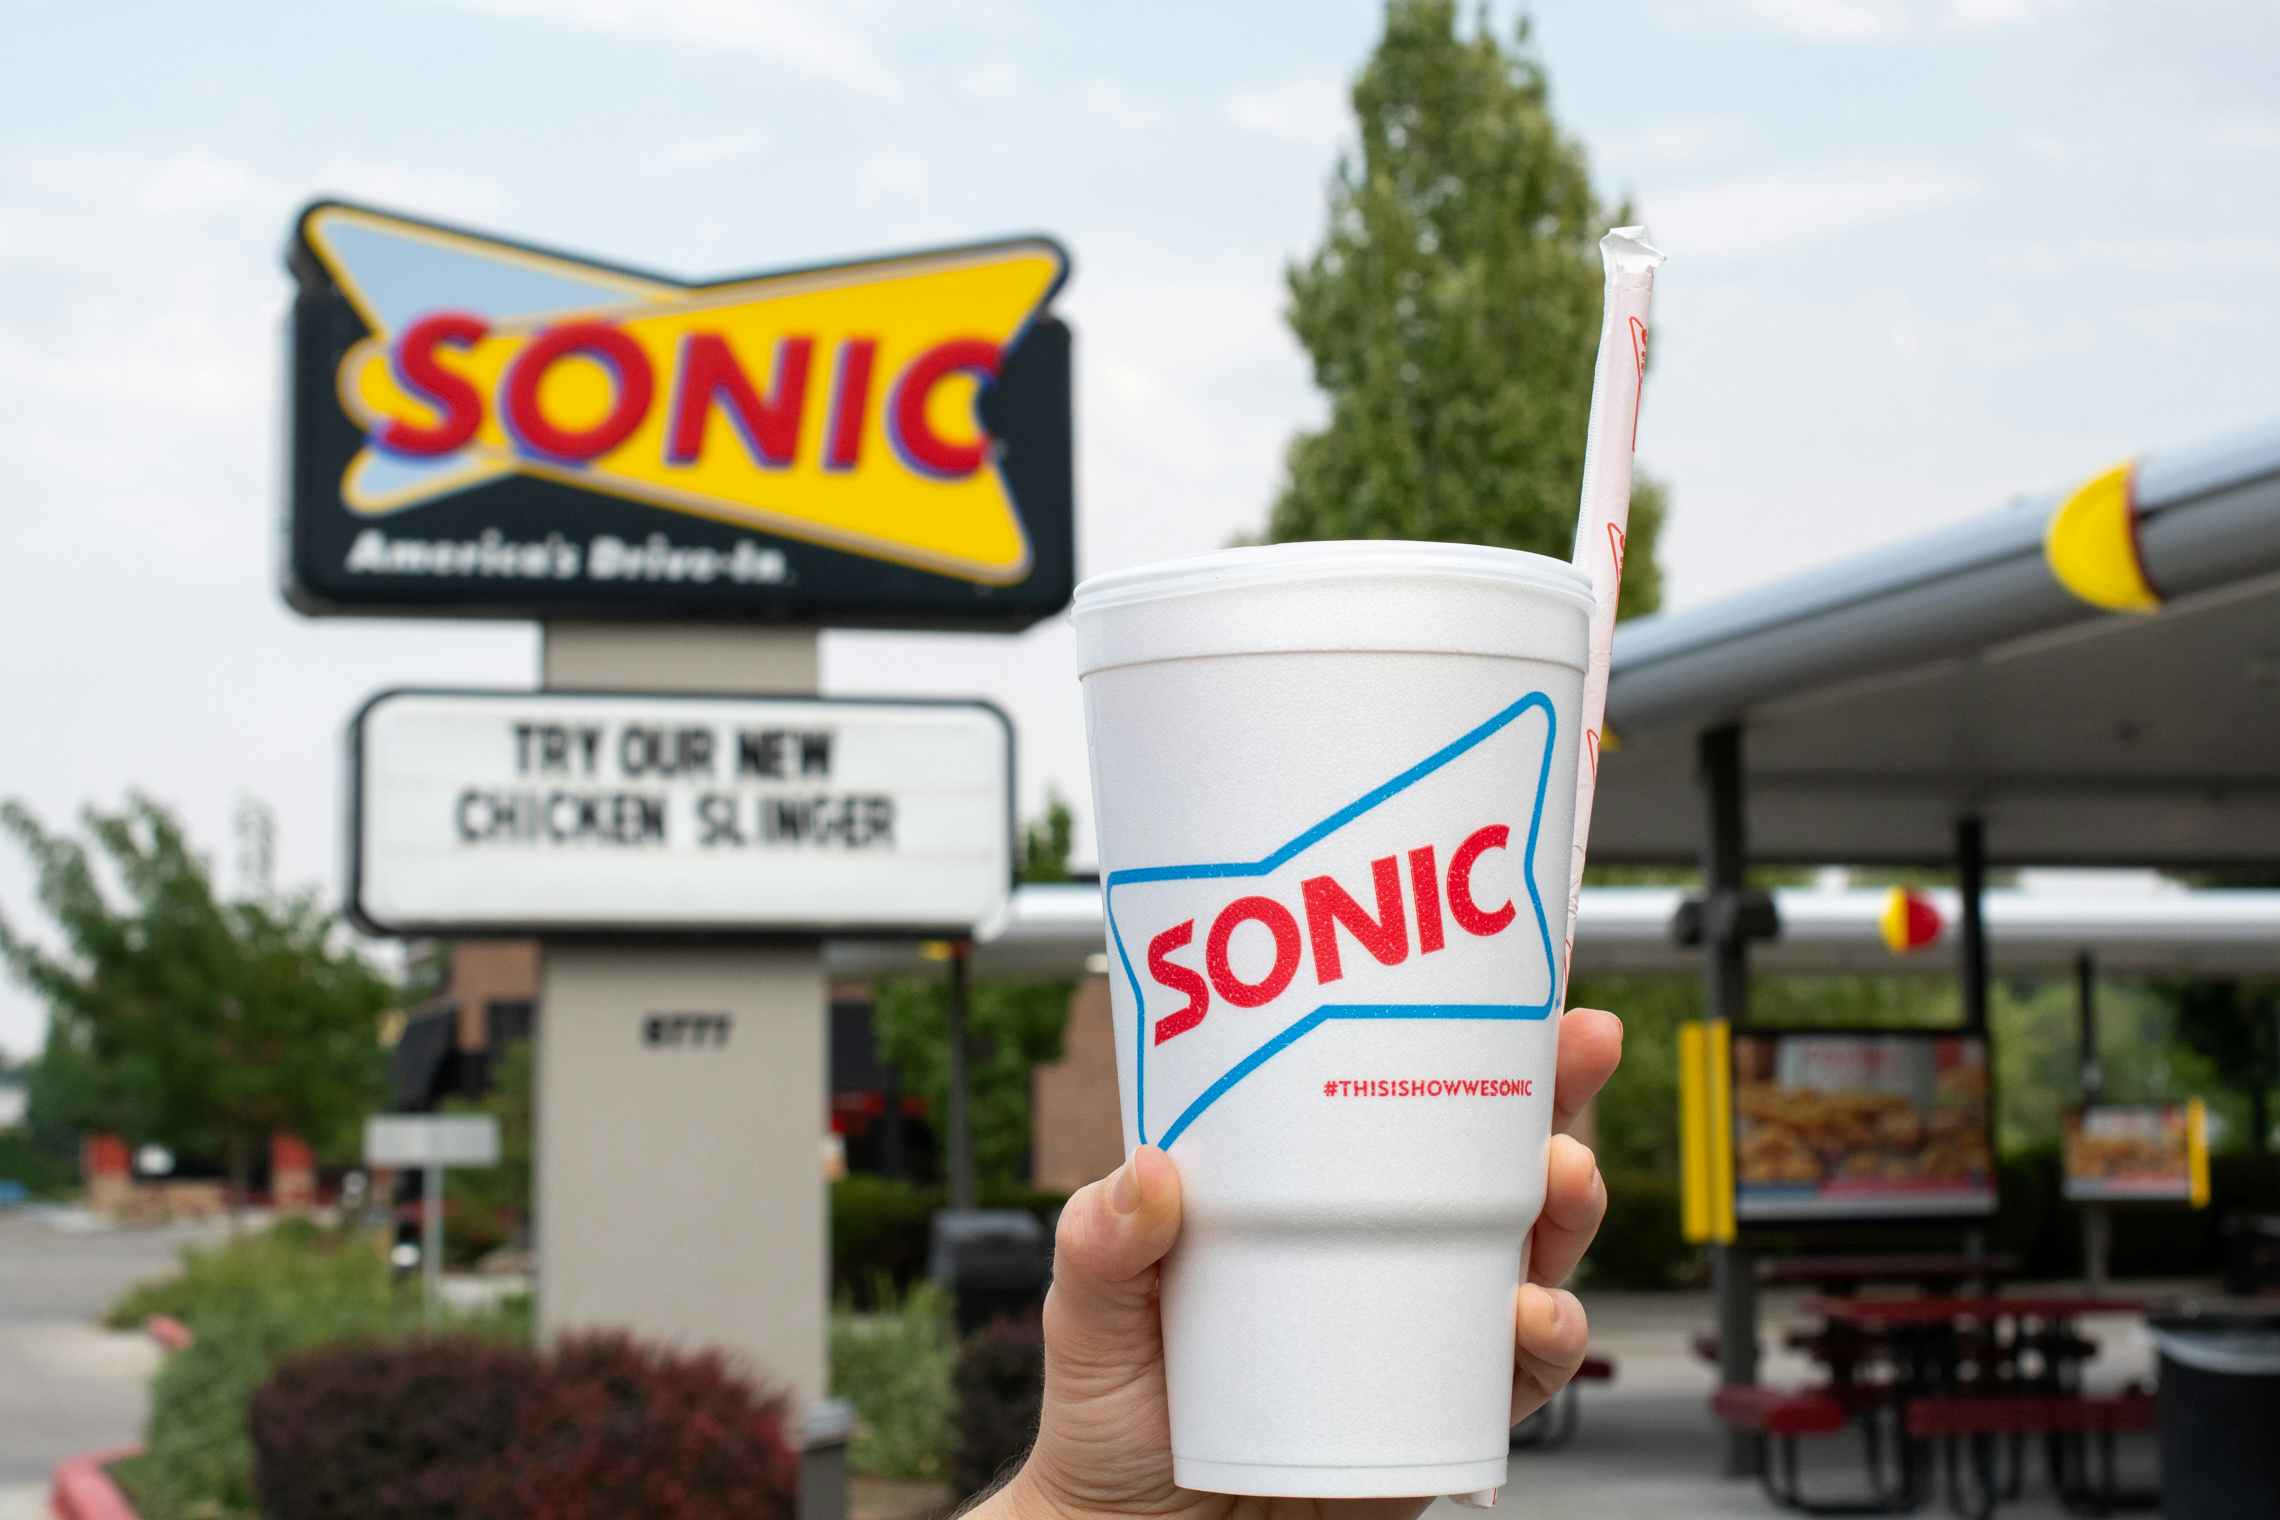 A person's hand holding up a Sonic drink cup and straw in front of a Sonic sign next to the drive-up parking spots.